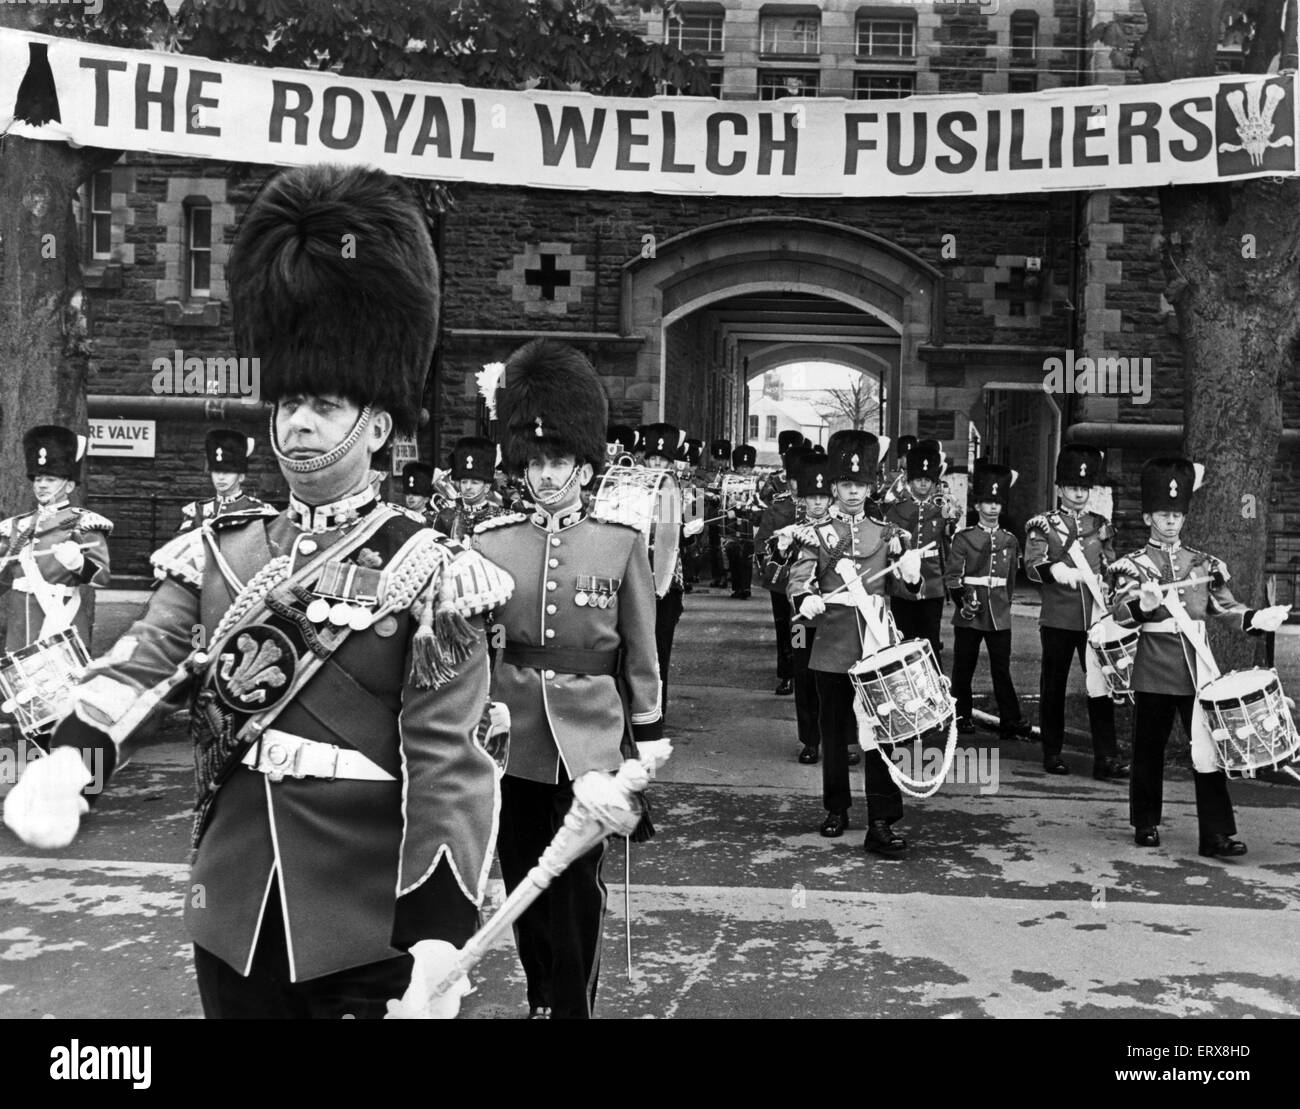 The 1st Battalion of the Royal Welch Fusiliers, march into Maindy Barracks, Cardiff, as part of rehearsals for the battalion's display in South Wales, 16th May 1968. Stock Photo